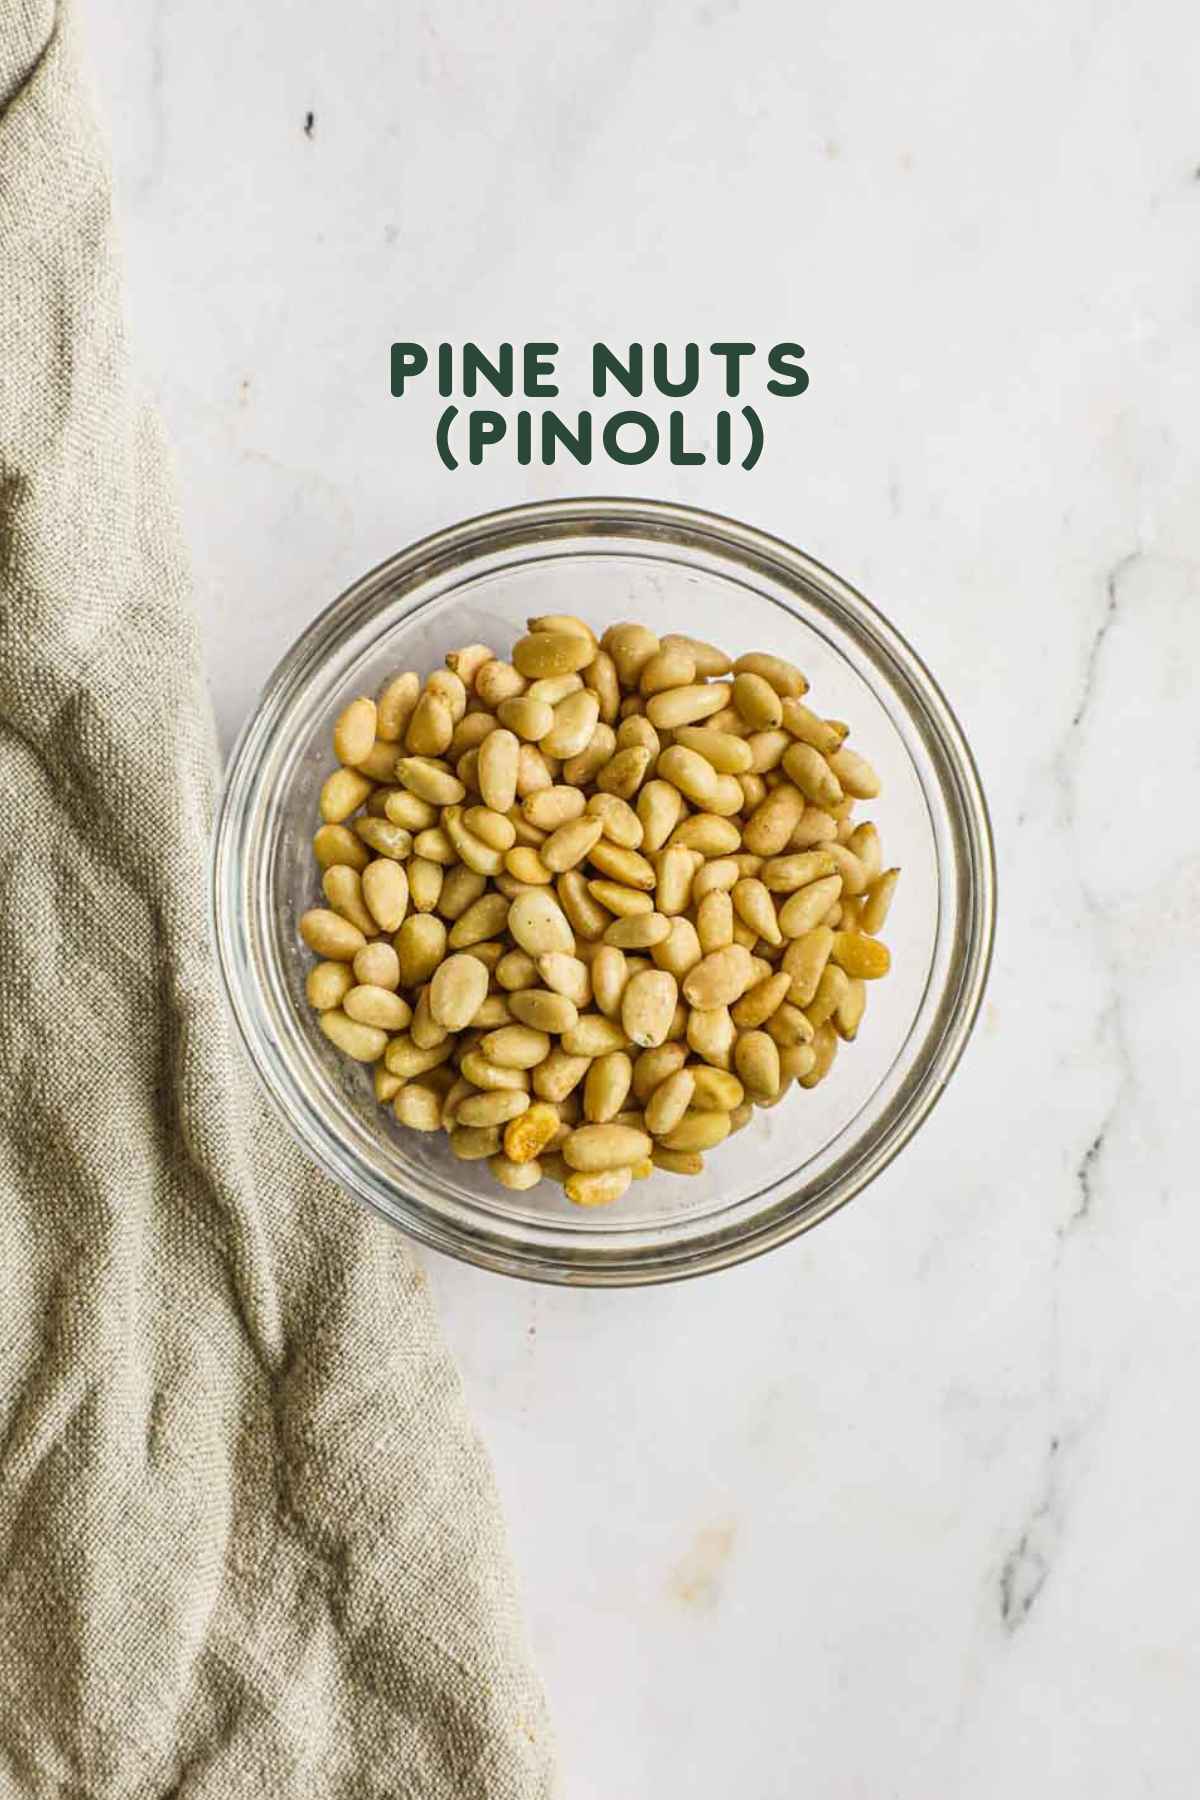 Ingredients to toast pine nuts, including raw pine nuts and a dry skillet.